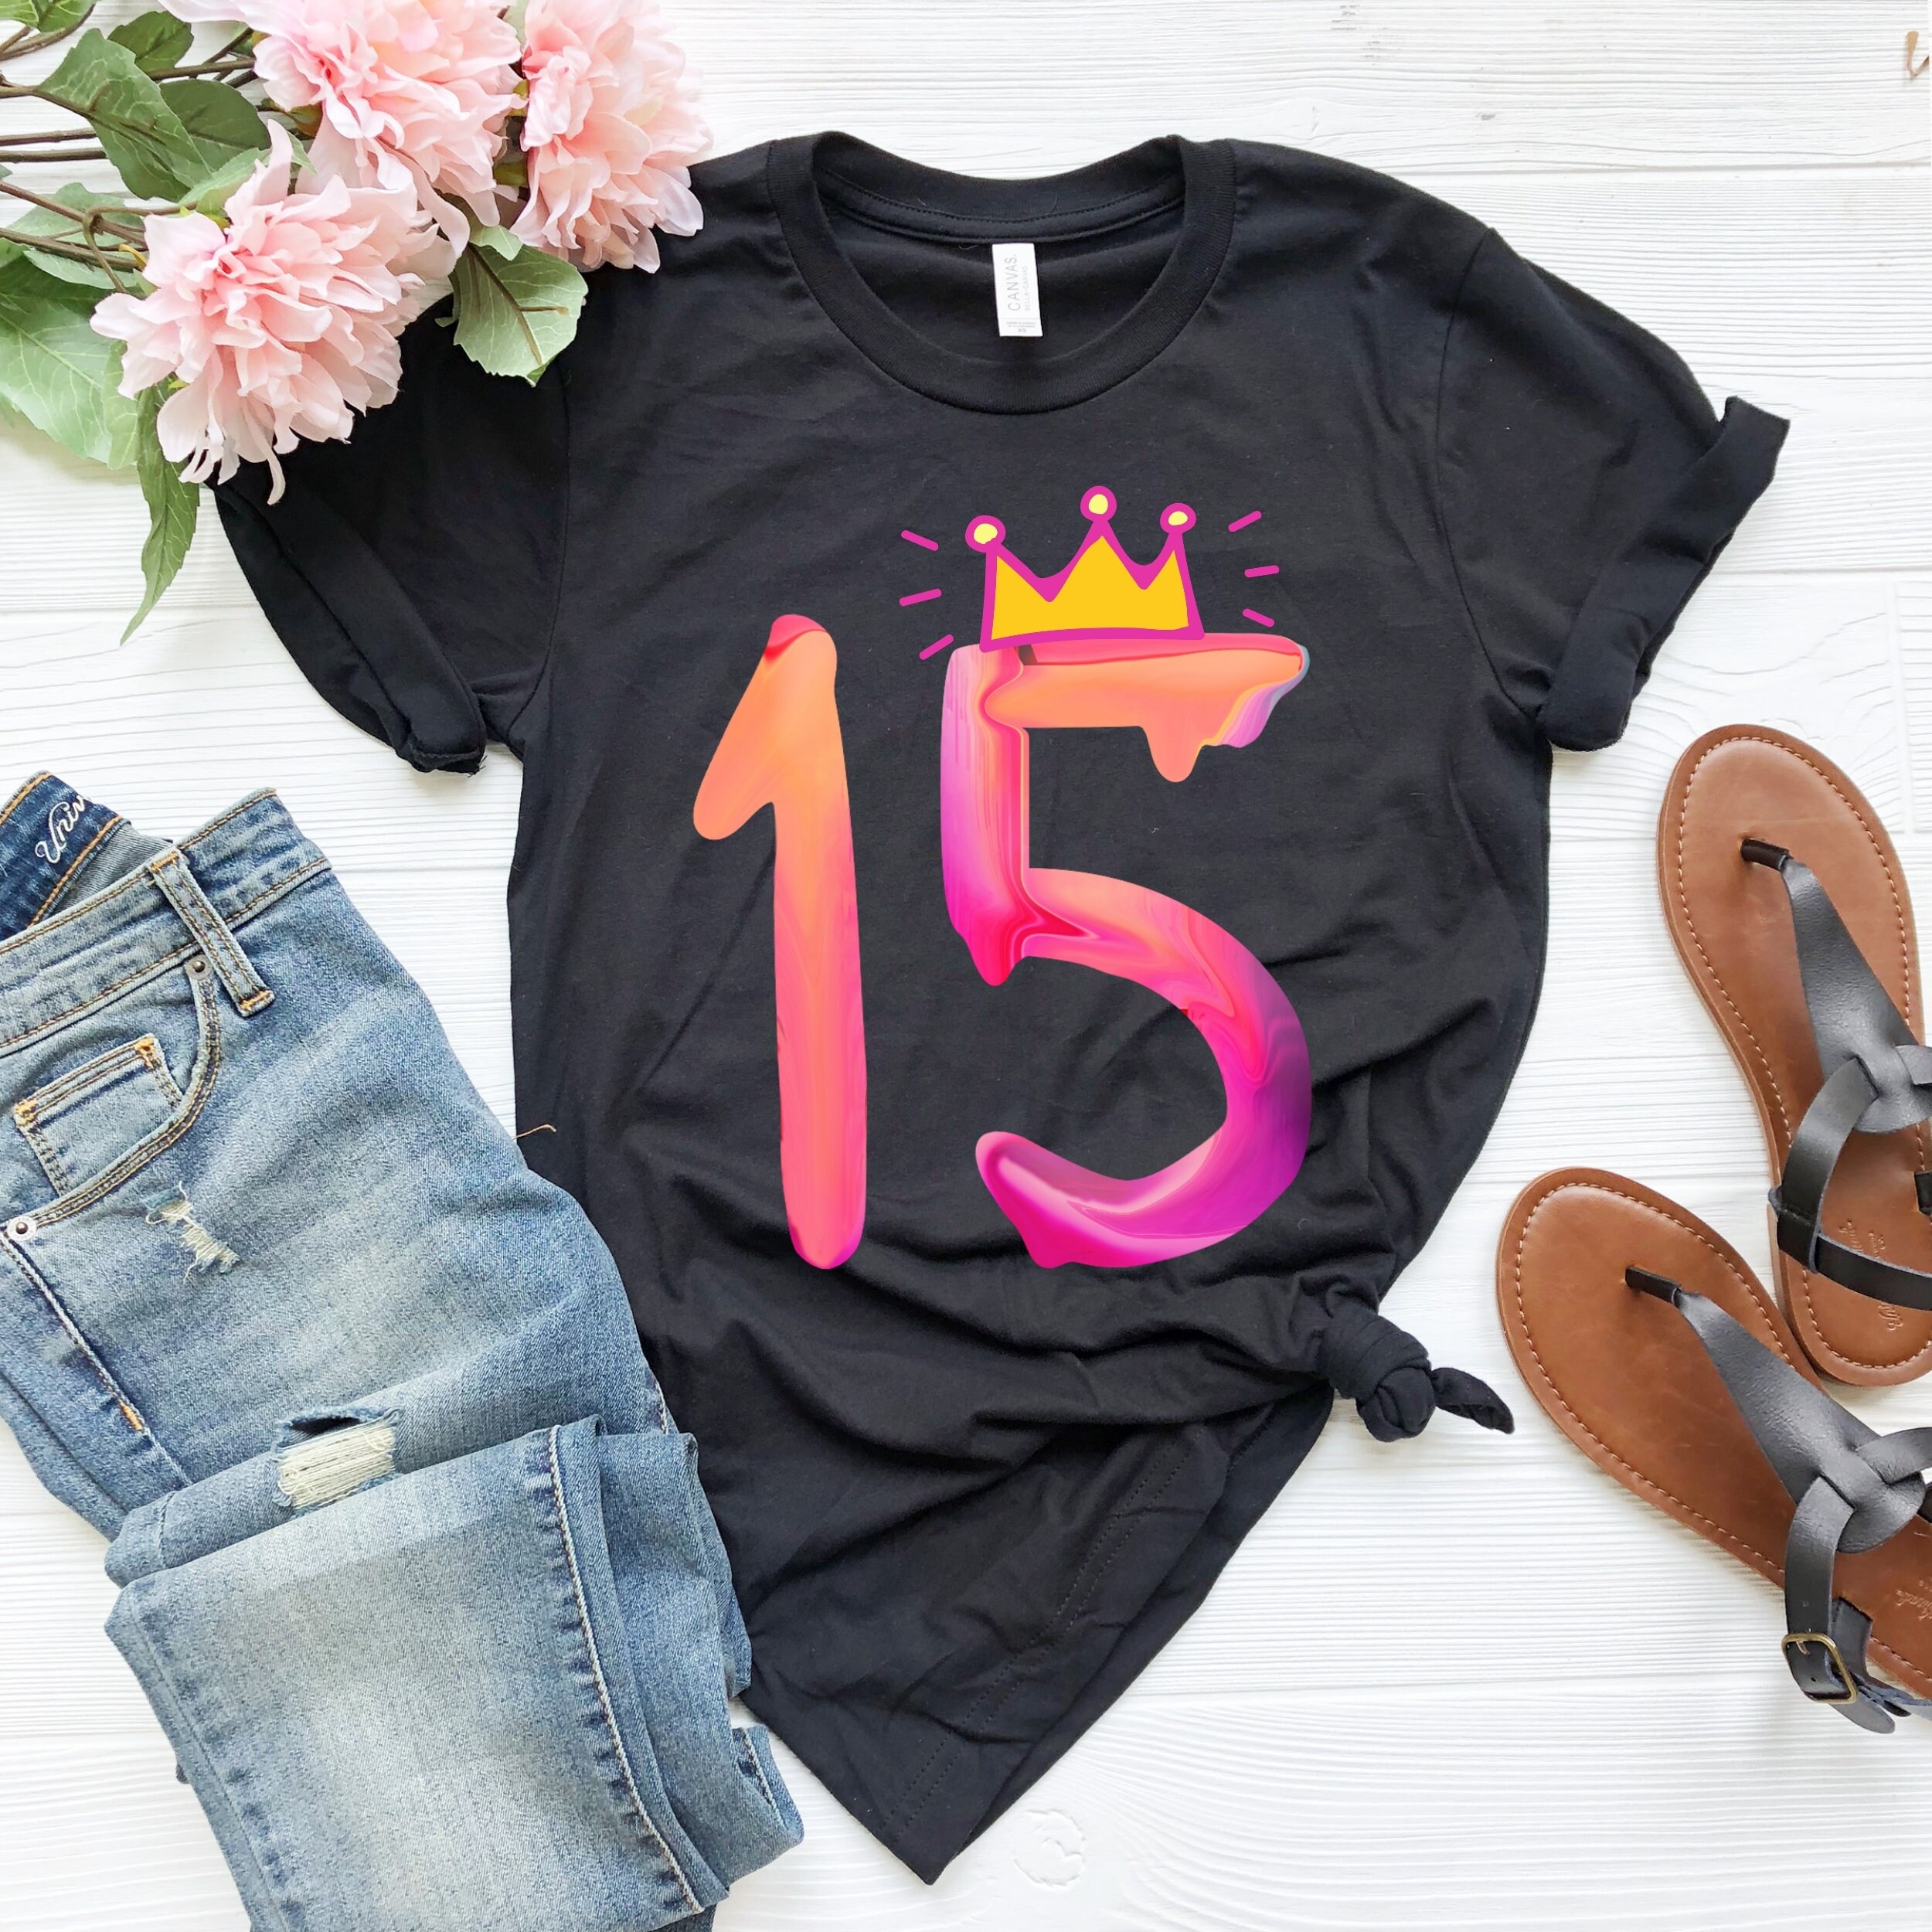 15 Years Old Made In 2008 Limited Edition 15th Birthday Gift Premium T ...